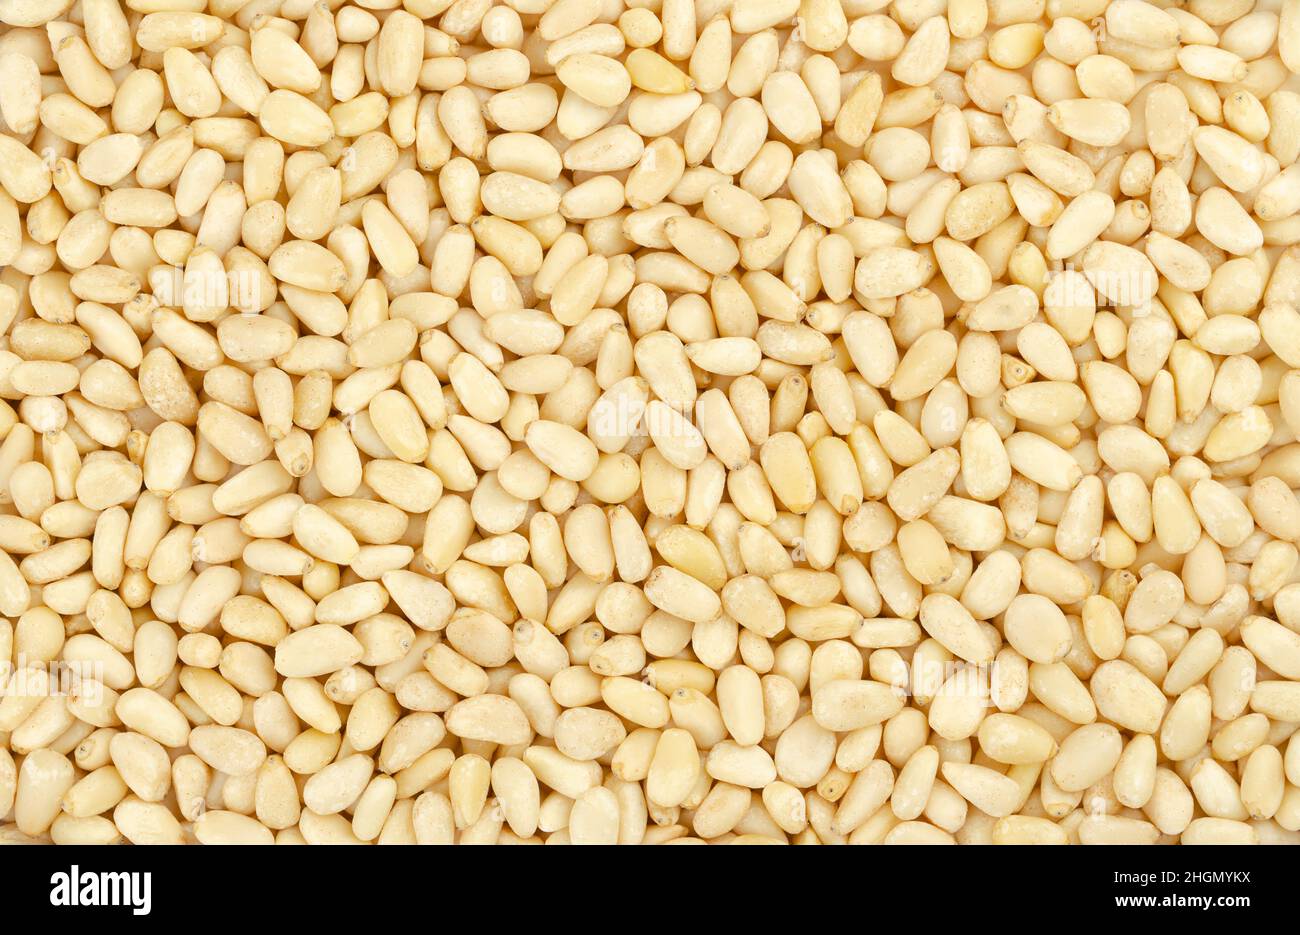 Pine nuts, surface and background. Beige and raw edible seeds of Chinese white pine, Pinus armandii. Also called pinon, pinoli and pignoli. Stock Photo